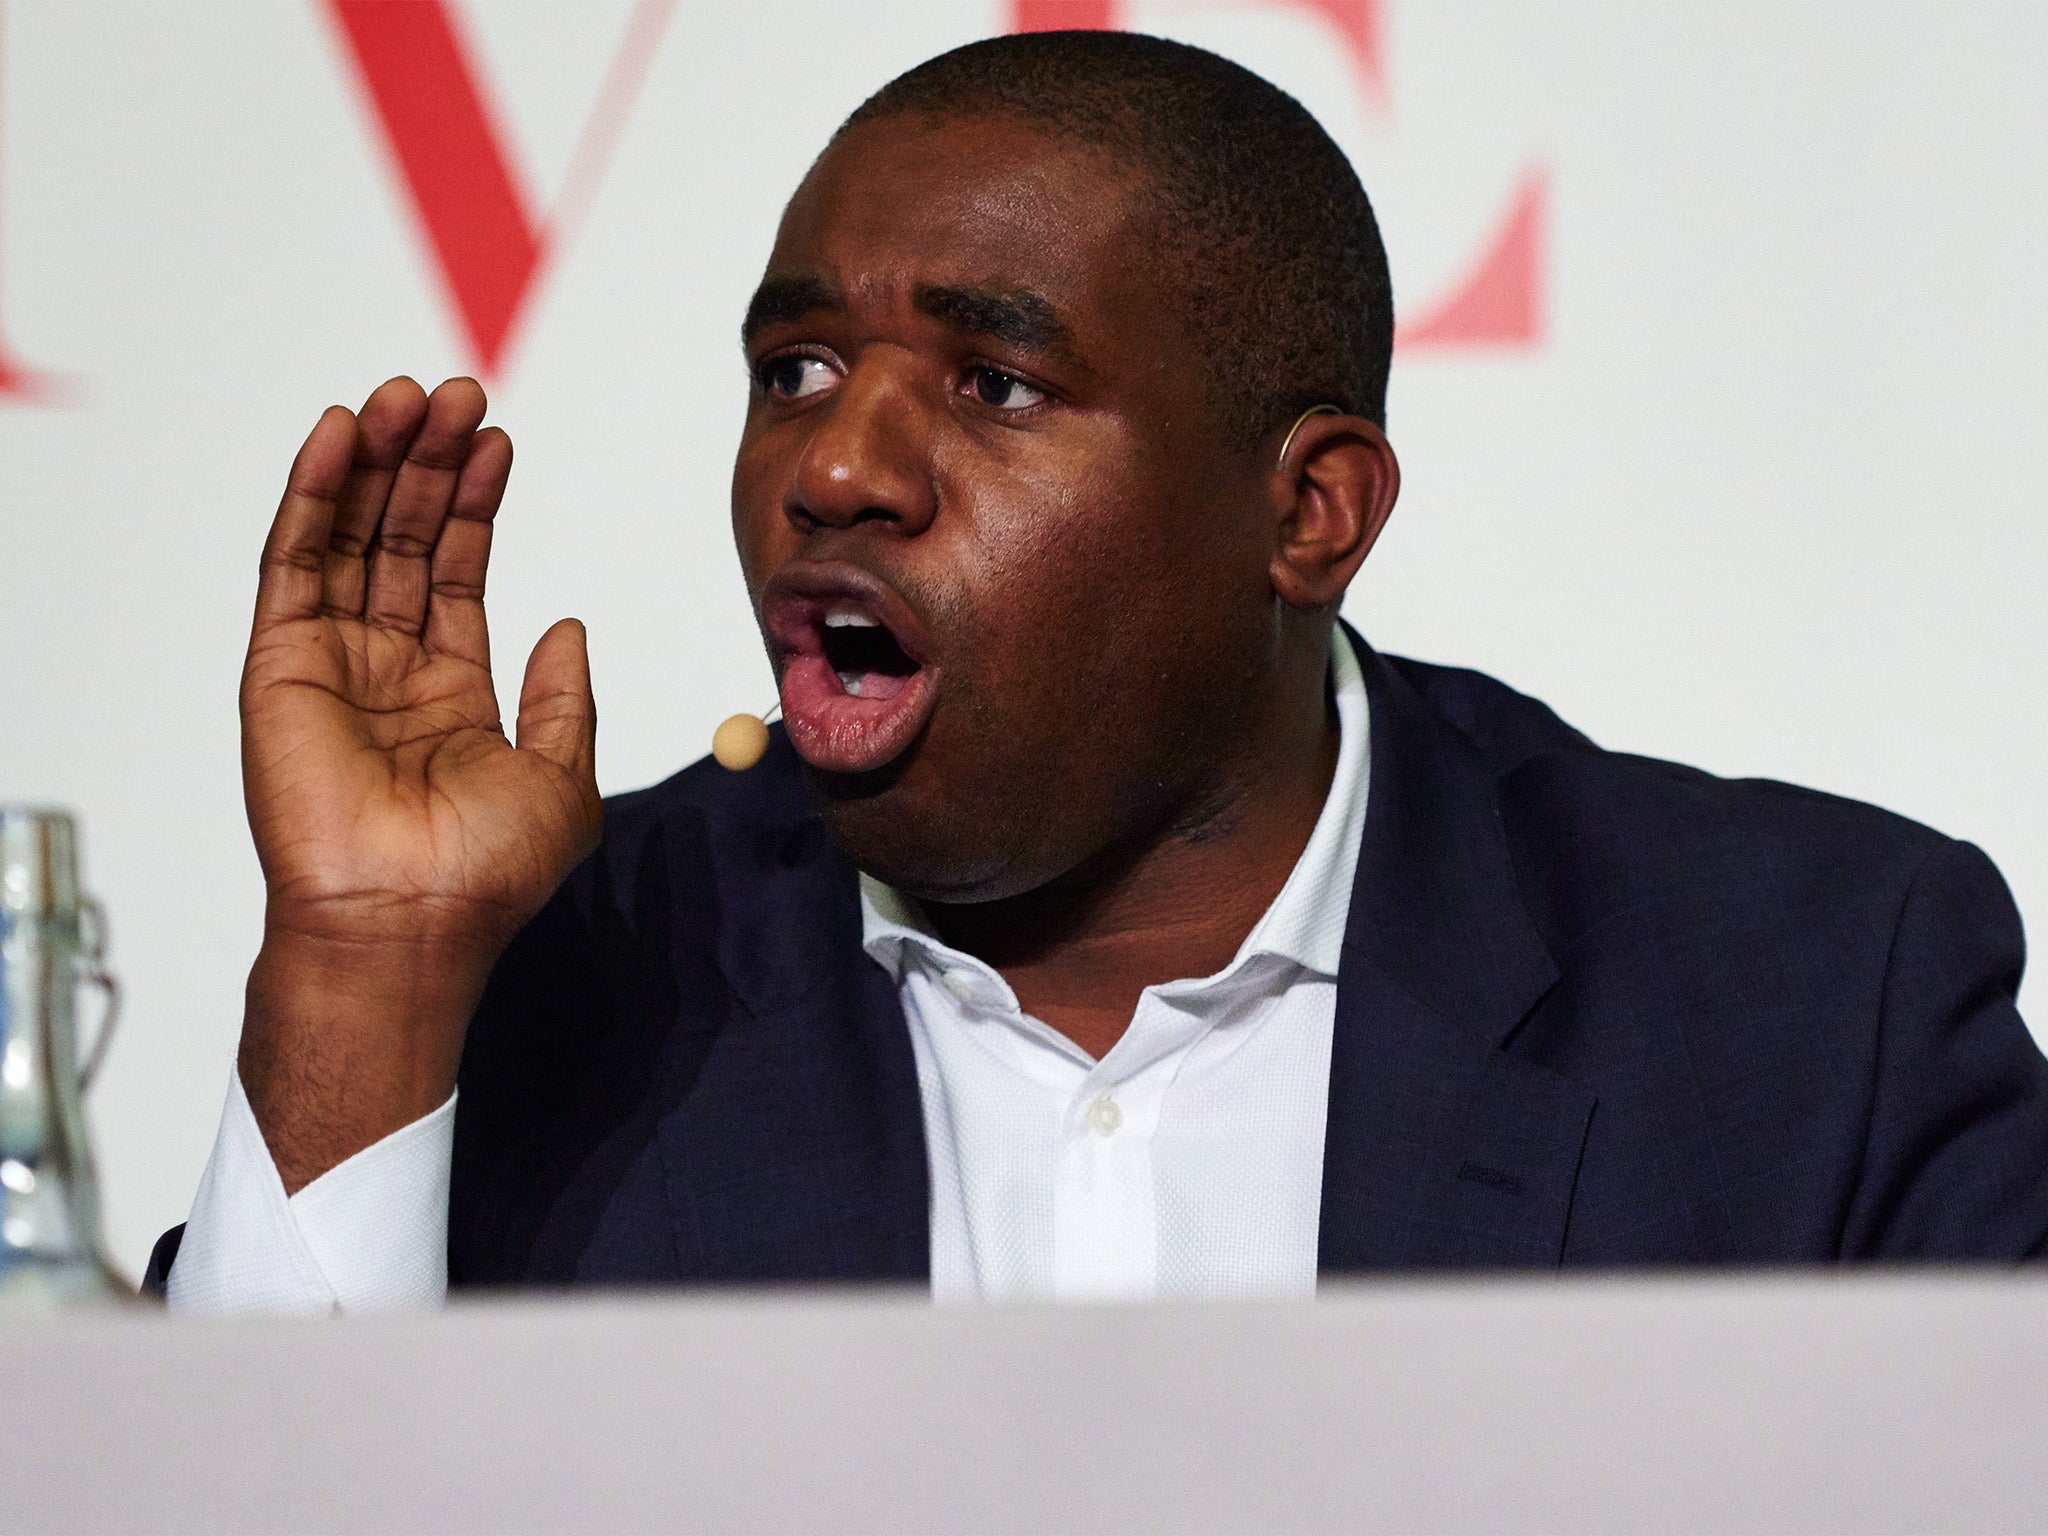 Labour MP for Tottenham, David Lammy, has organised opposition in Parliament